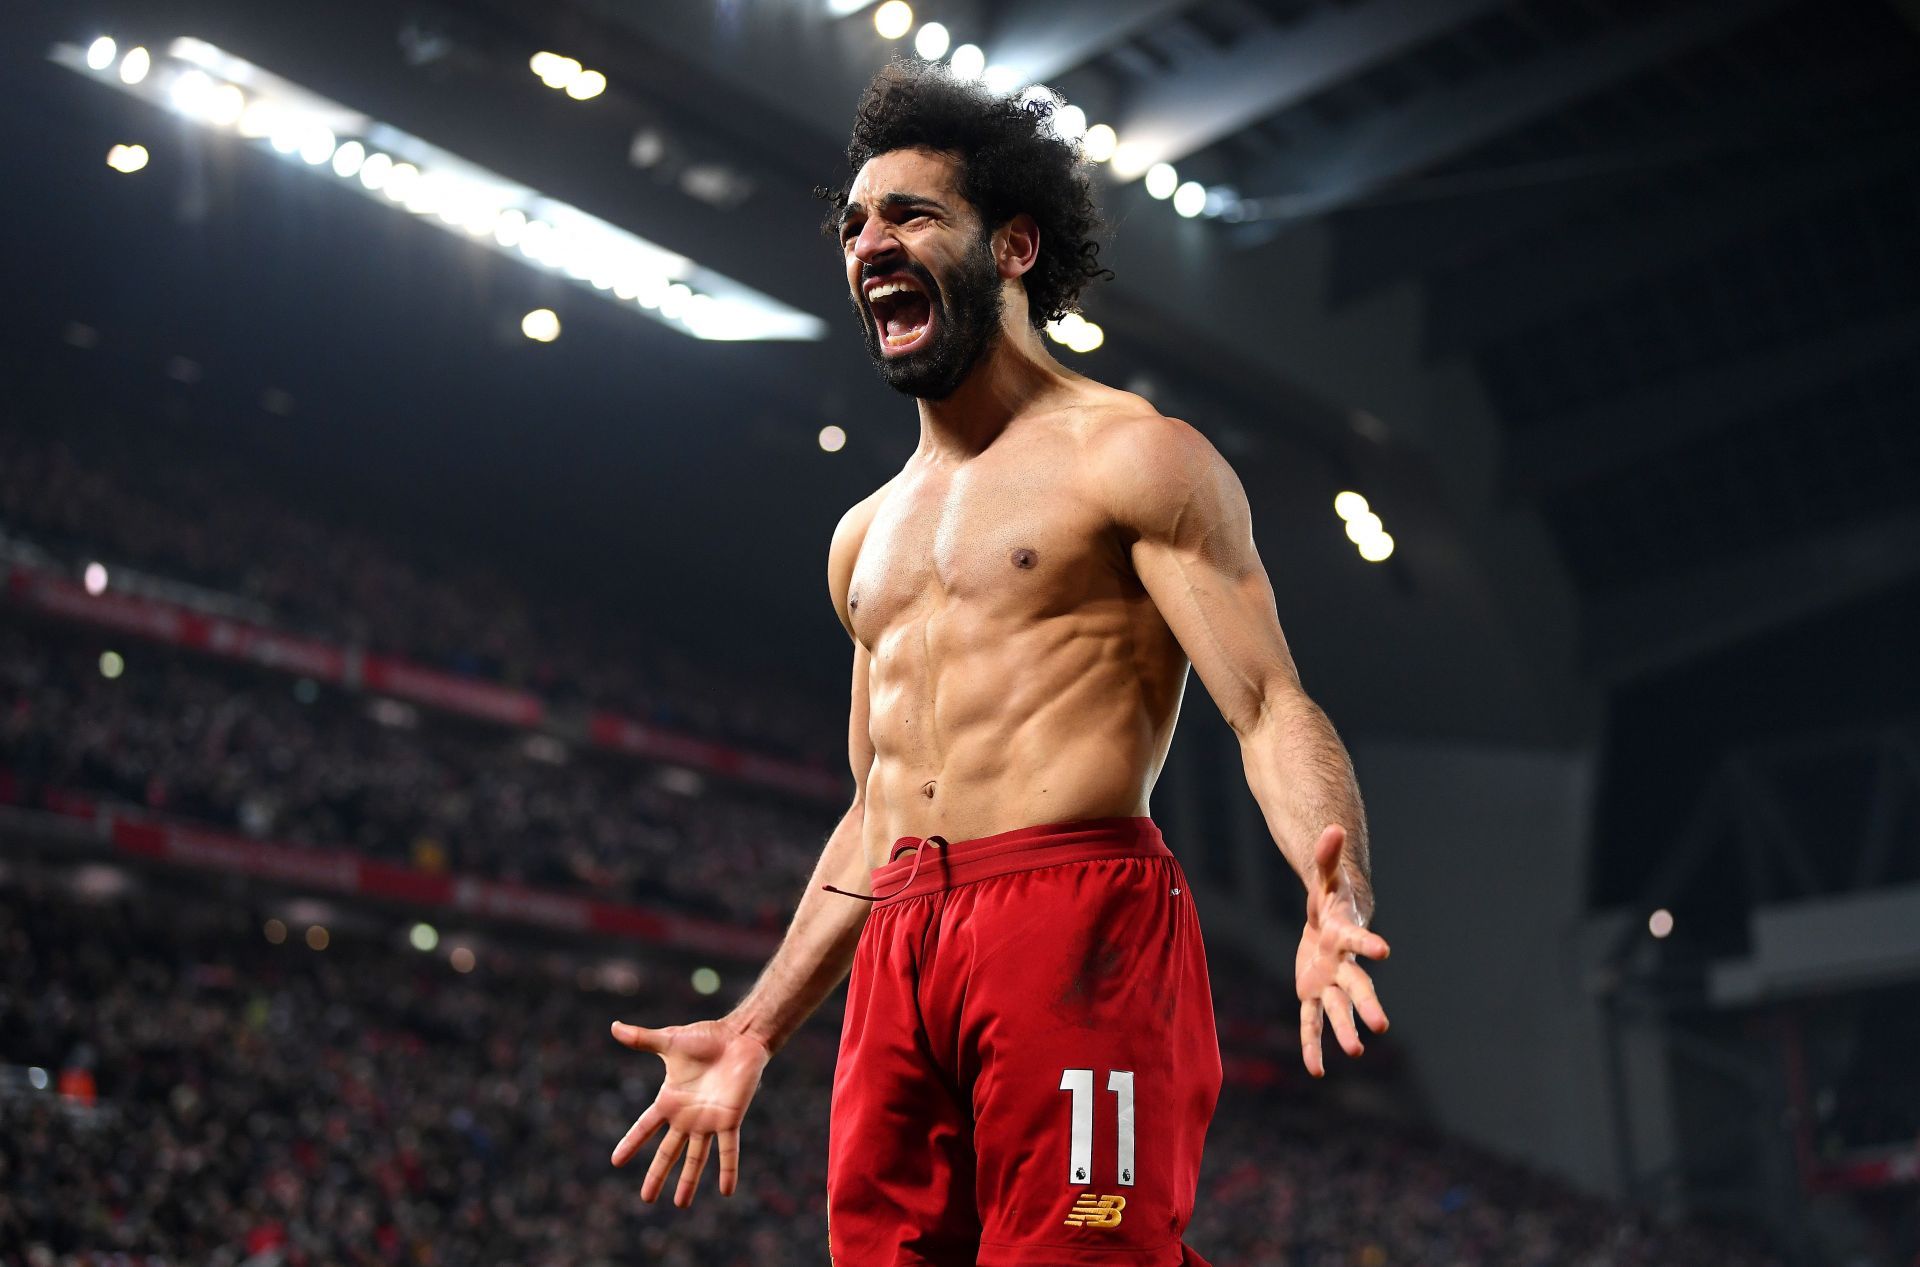 The Egyptian has become a fan favorite at Anfield